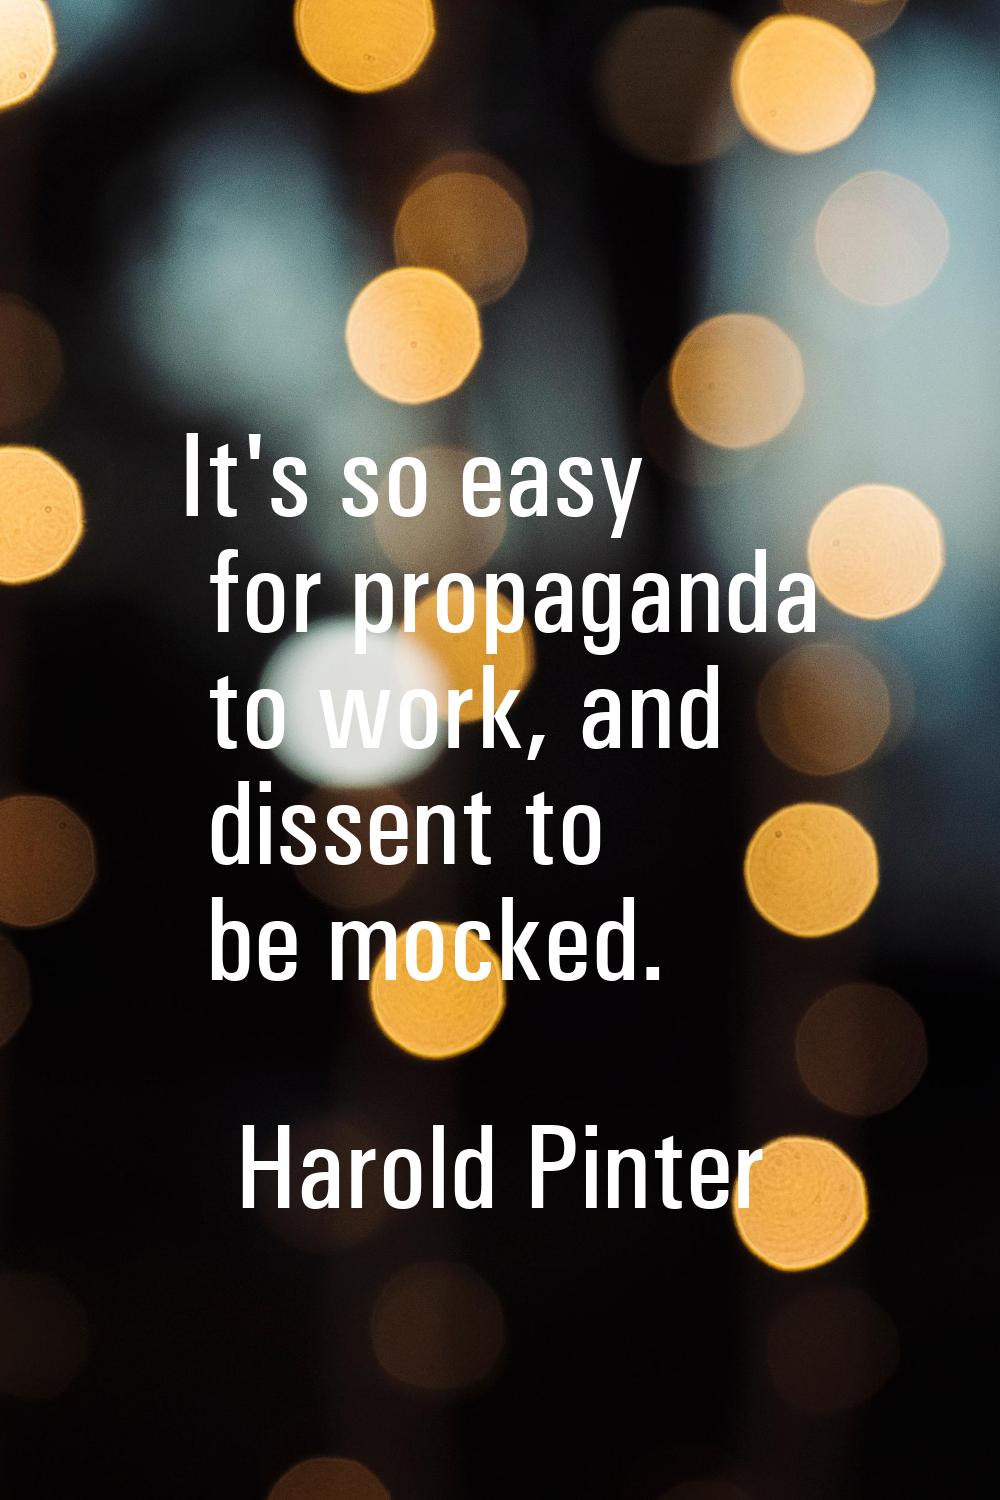 It's so easy for propaganda to work, and dissent to be mocked.